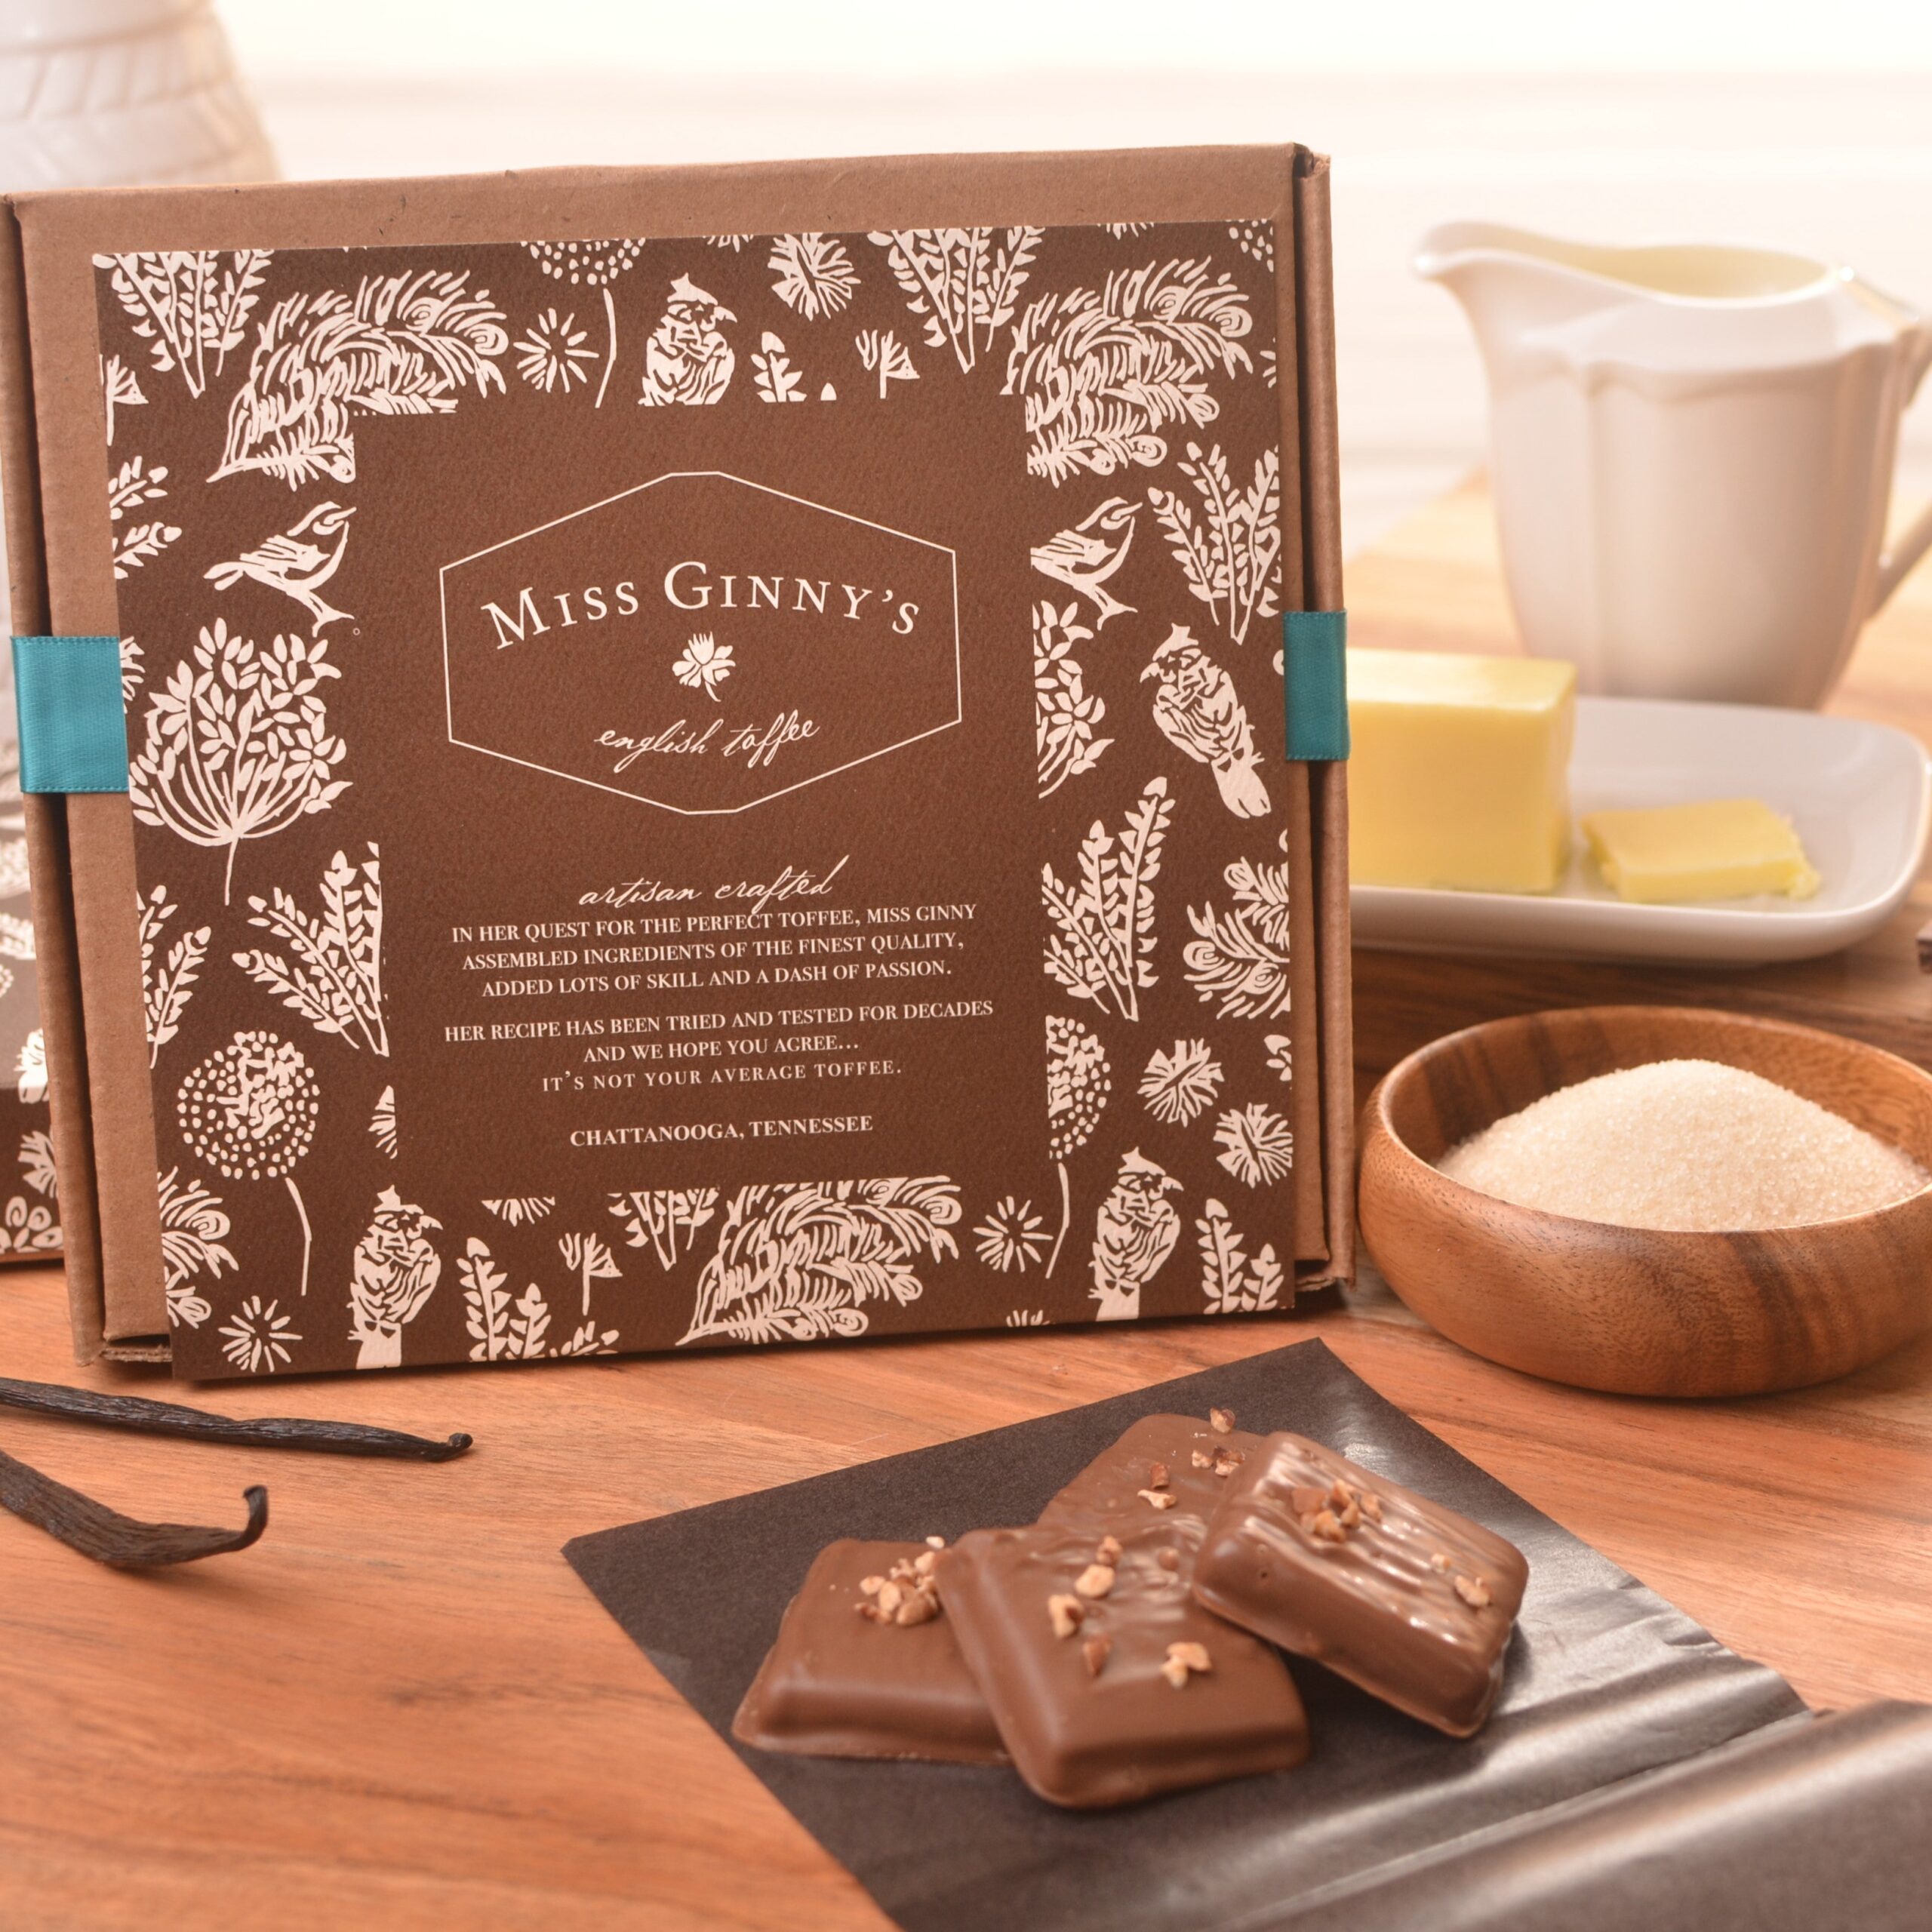 Miss Ginny’s English Toffee Gift Box